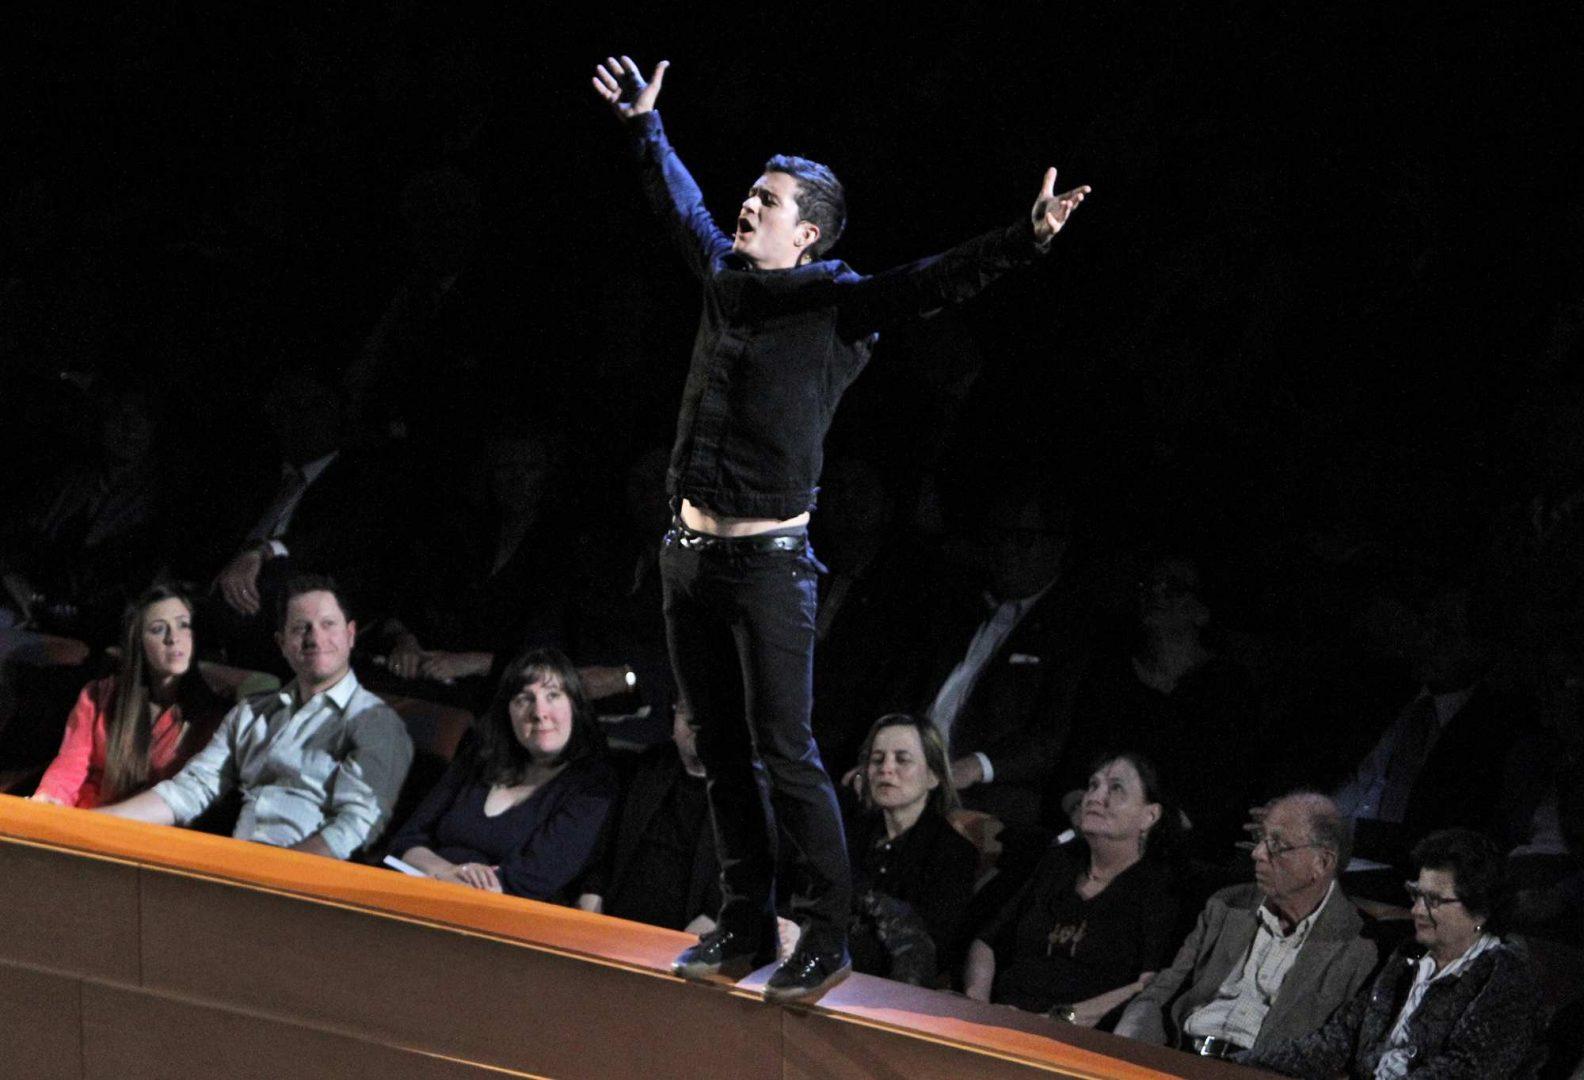 Orlando Bloom as Romeo acts a scene from "Romeo and Juliet," March 10, 2011. (Lawrence K. Ho/Los Angeles Times/MCT)